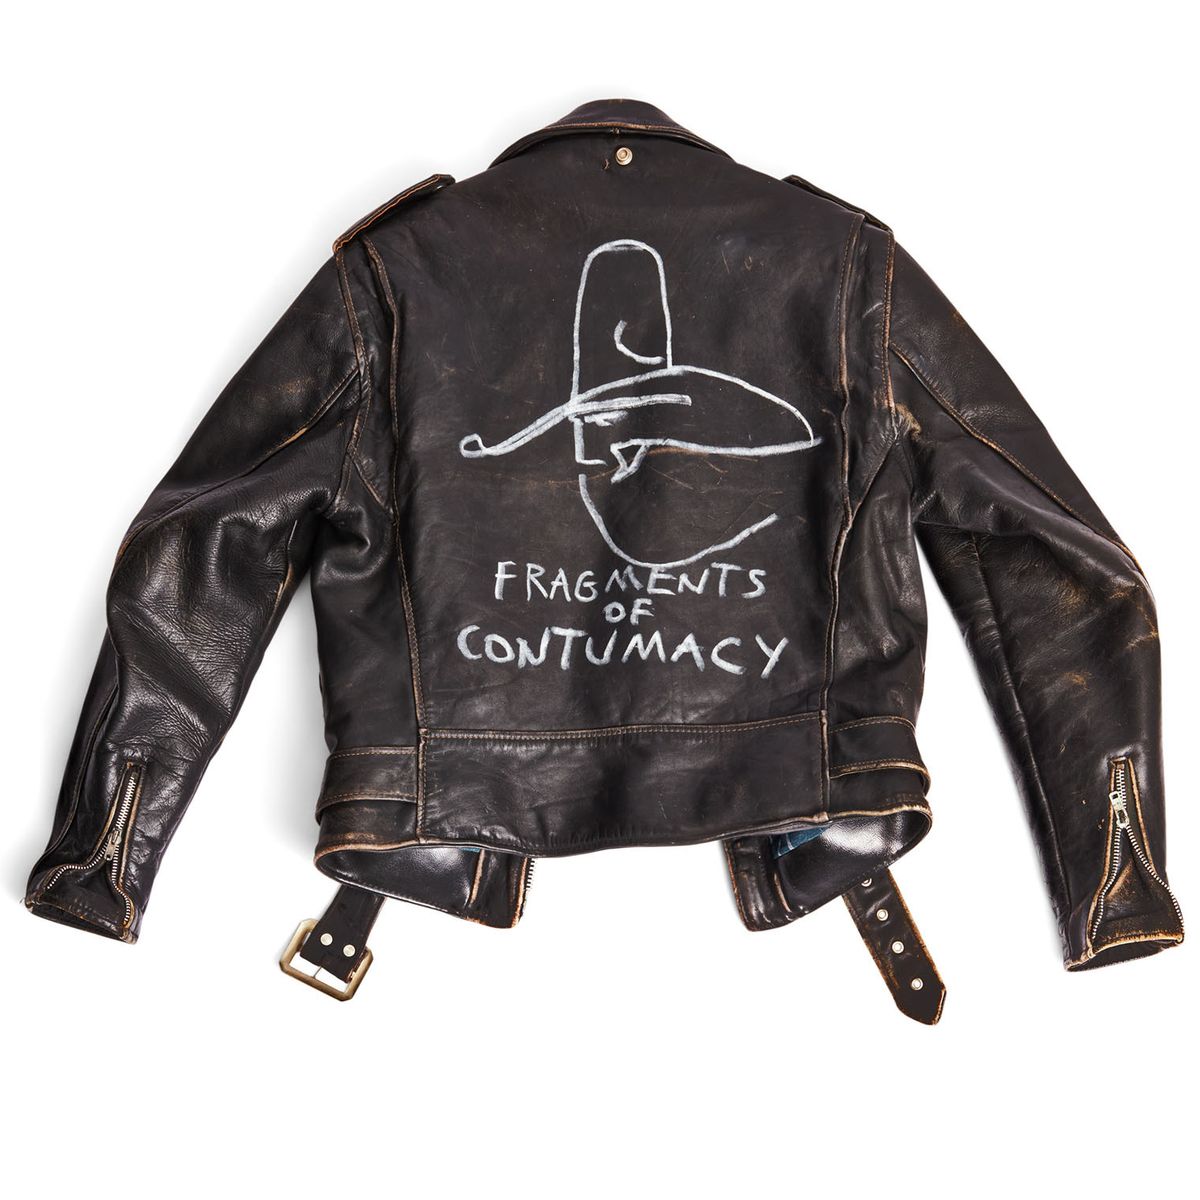 Esquire asked me to write something short about a wardrobe item important to me, so I chose this leather jacket I had signed by buZ blurr, a graffiti artist I admired as a kid. Sadly, blurr passed away a few weeks after I submitted my copy. RIP 🔗: blst.to/zGpPdTI